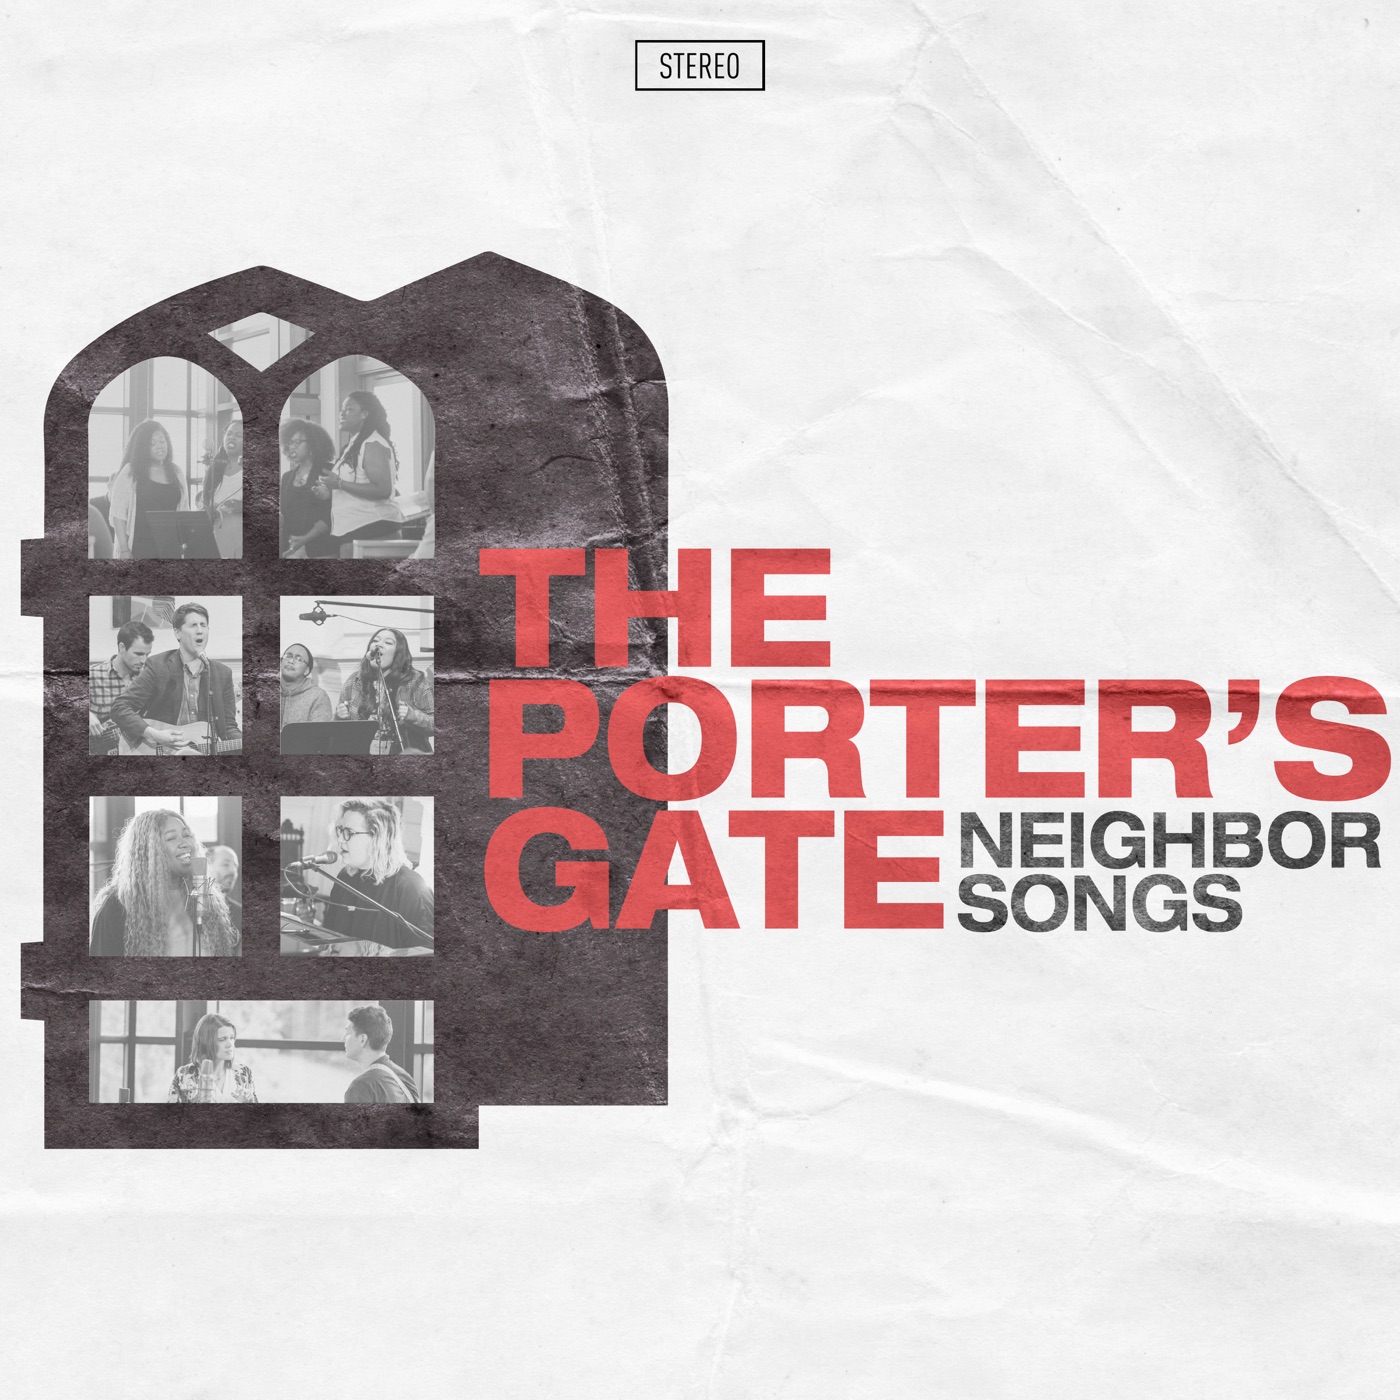 Neighbor Songs by The Porter's Gate